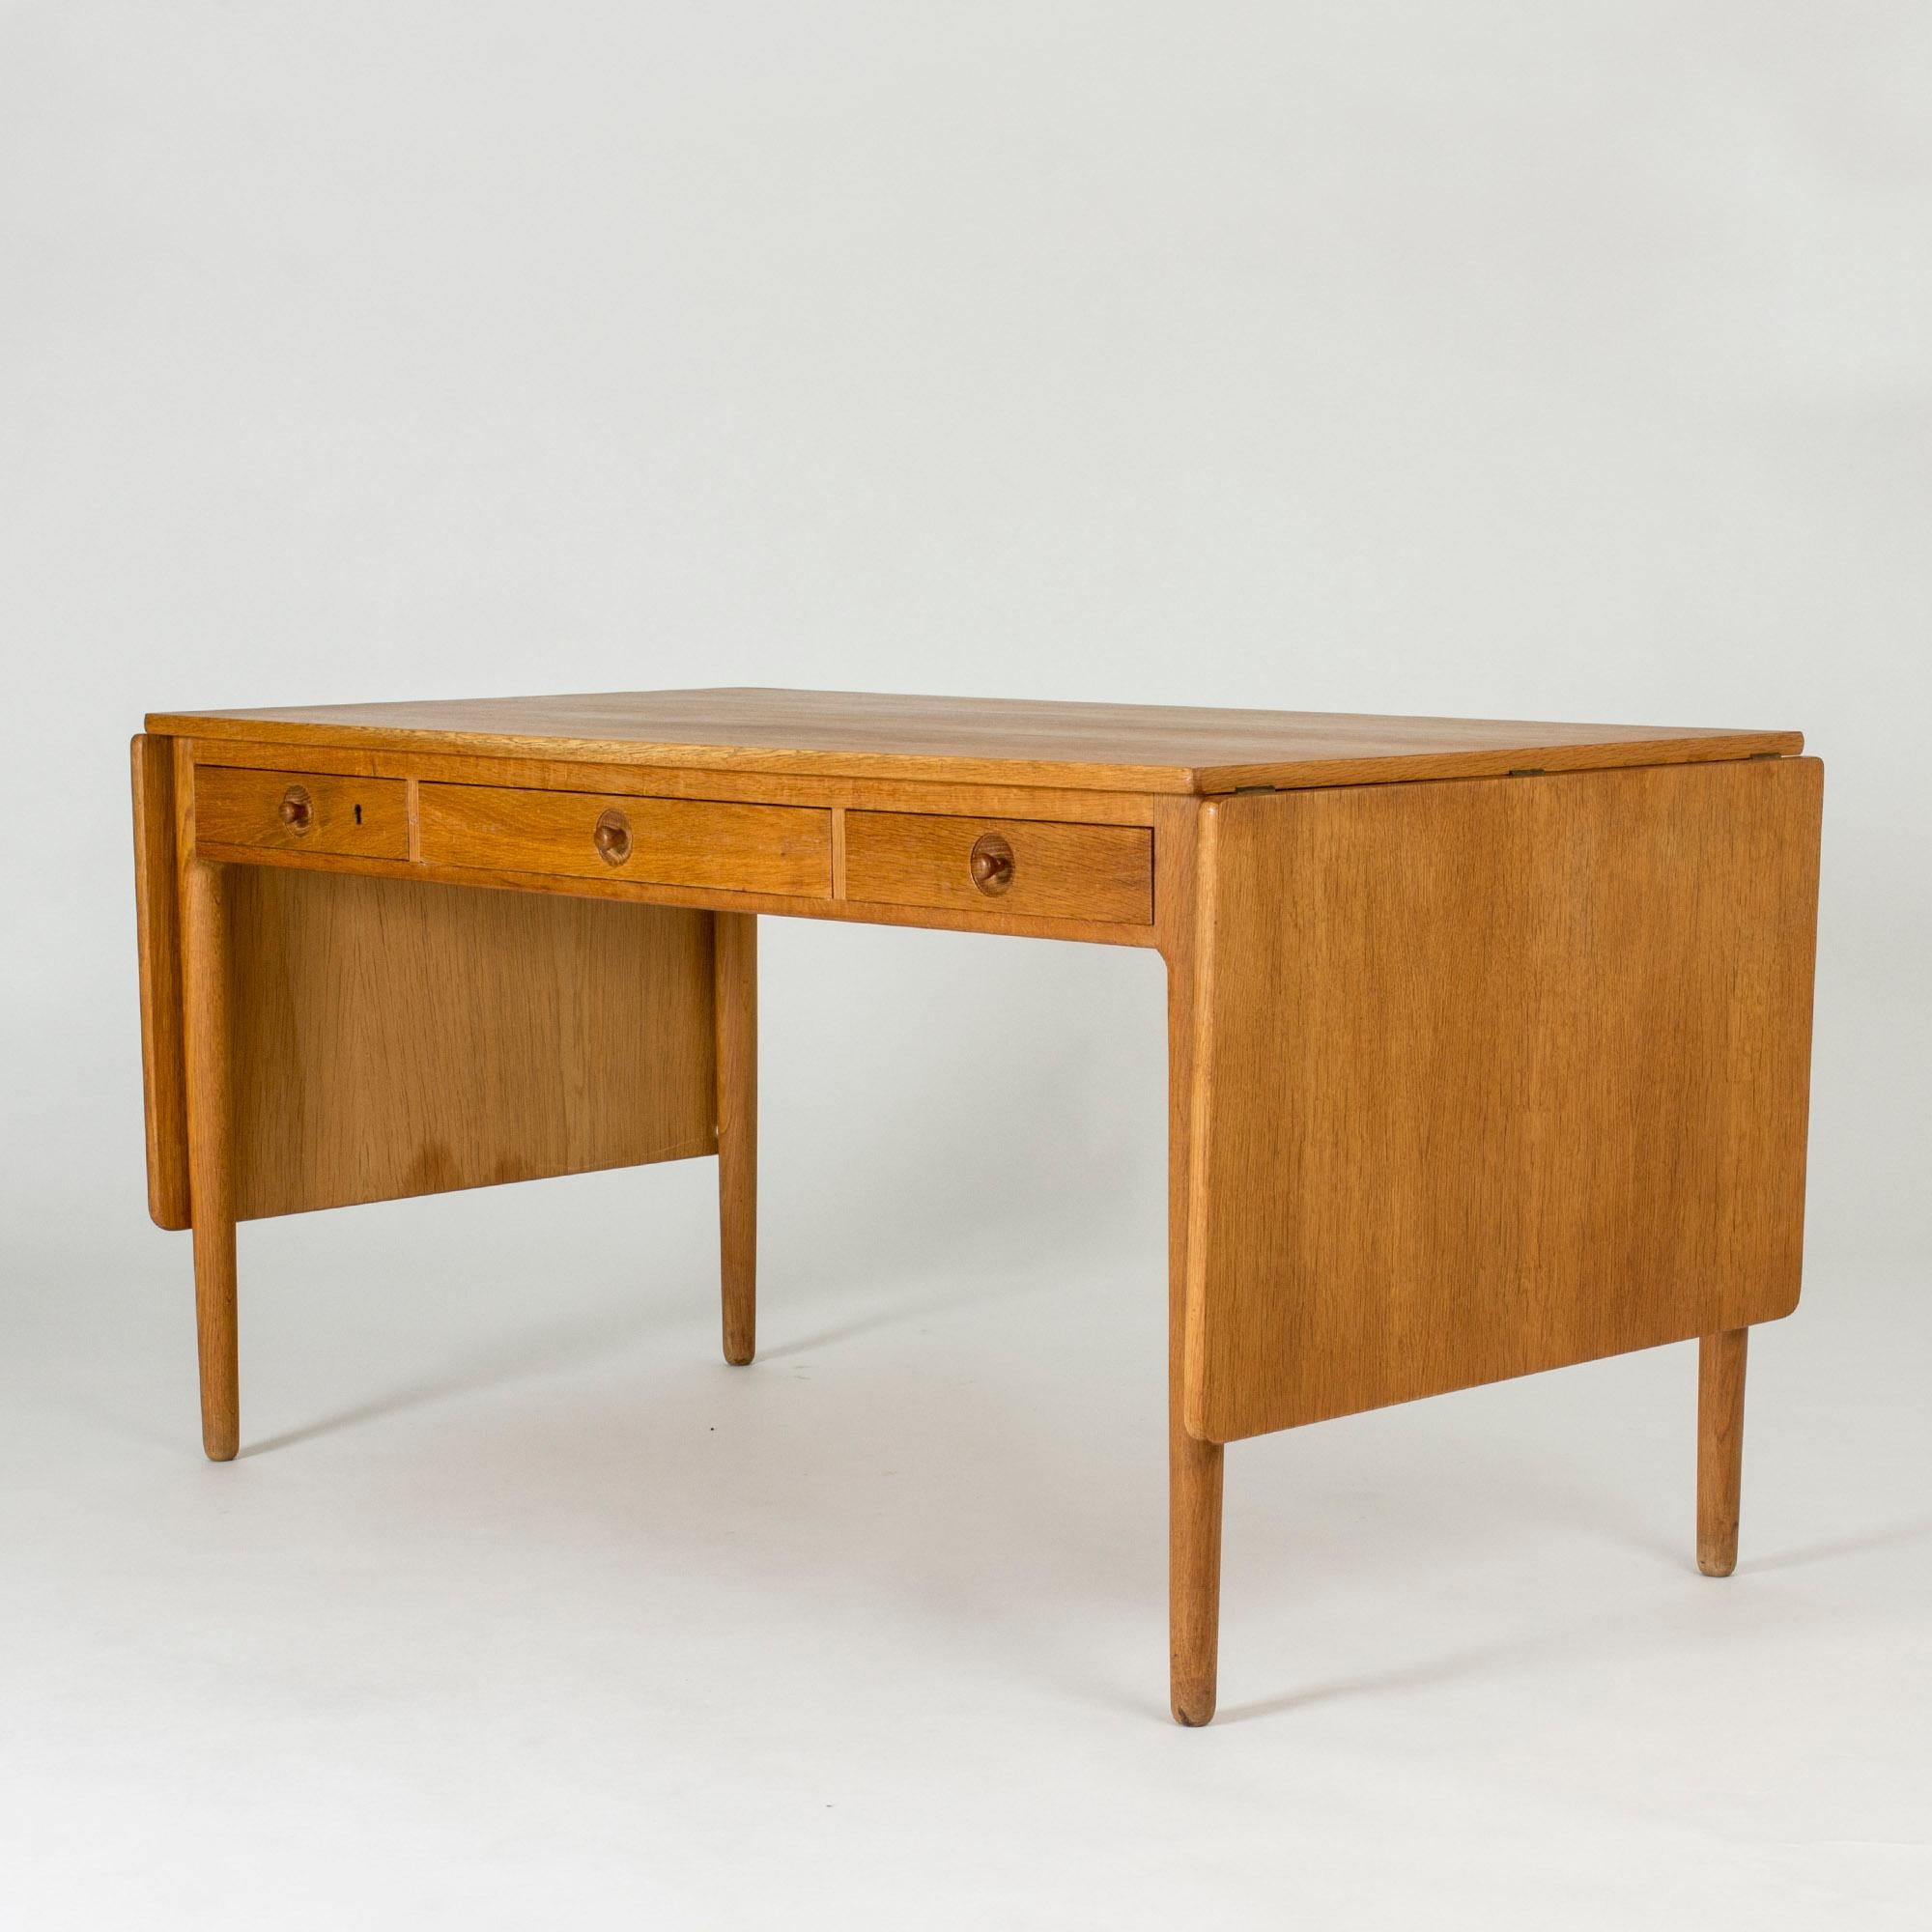 Desk by Hans J. Wegner made from oak. Two drop leaves make it possible to extend the desk to 232 cm, making it easy to use as a conference table. Three drawers with charming sculpted knobs. One of the drawers has a carefully executed inset for